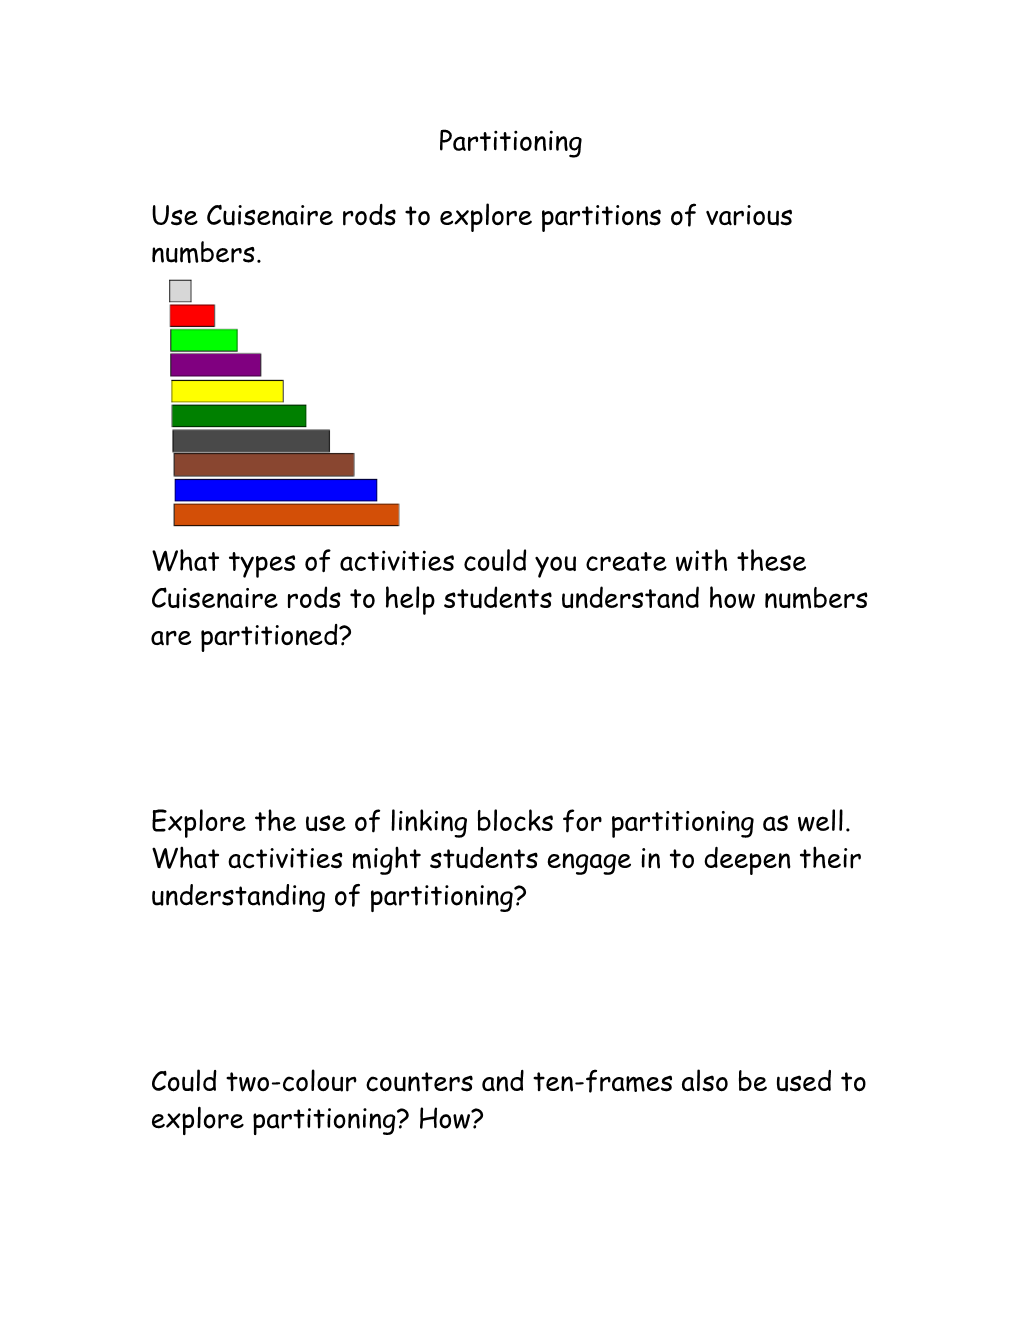 Use Cuisenaire Rods to Explore Partitions of Various Numbers